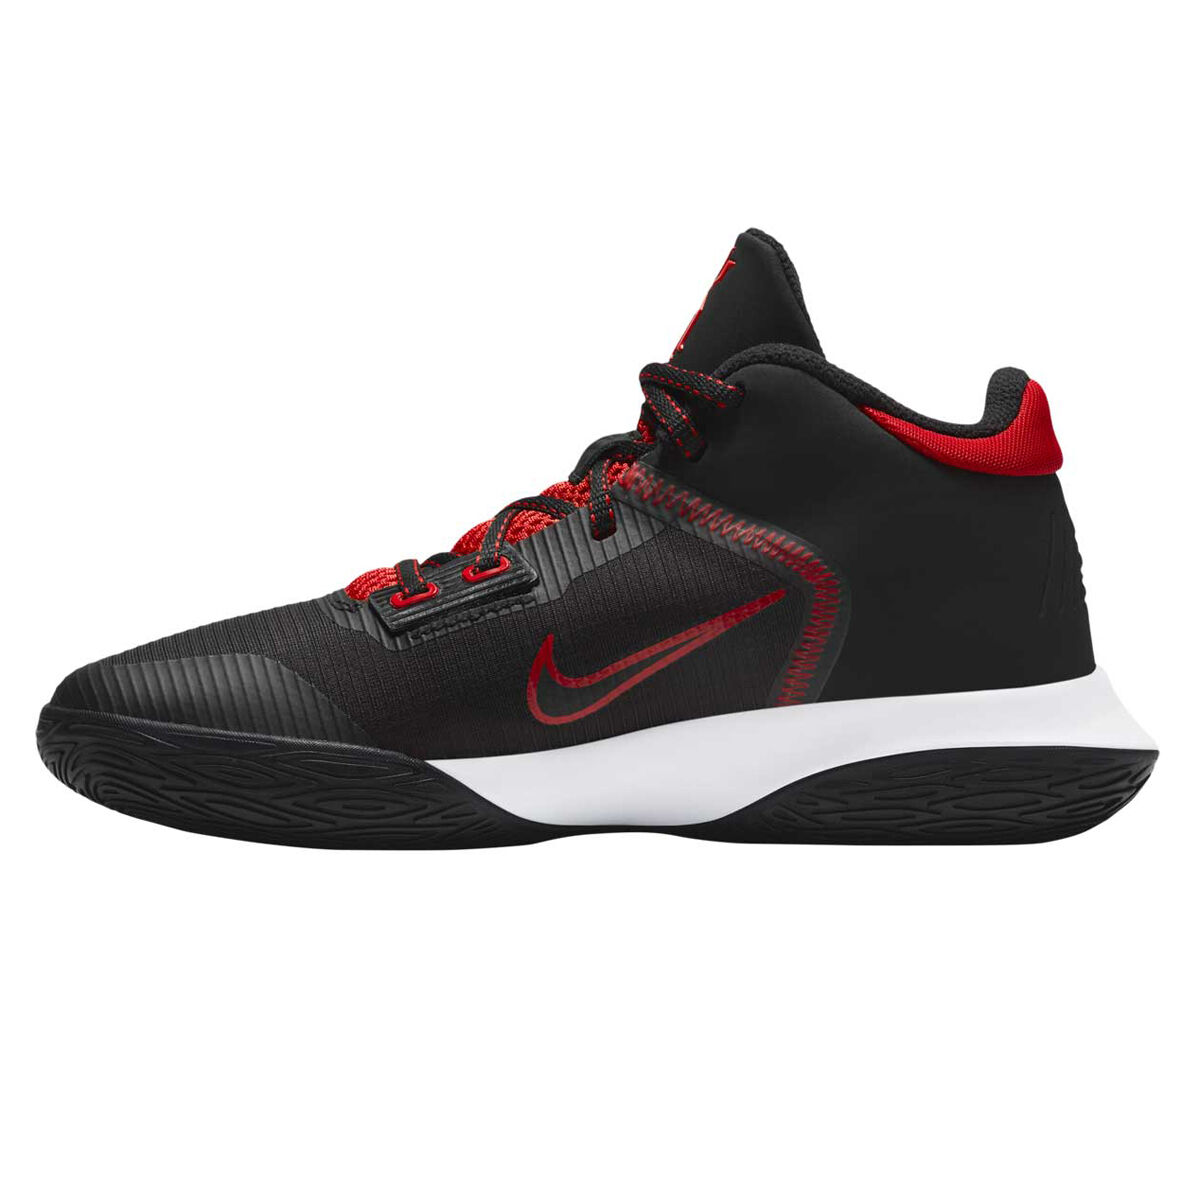 Basketball Shoes | Nike, Under Armour 